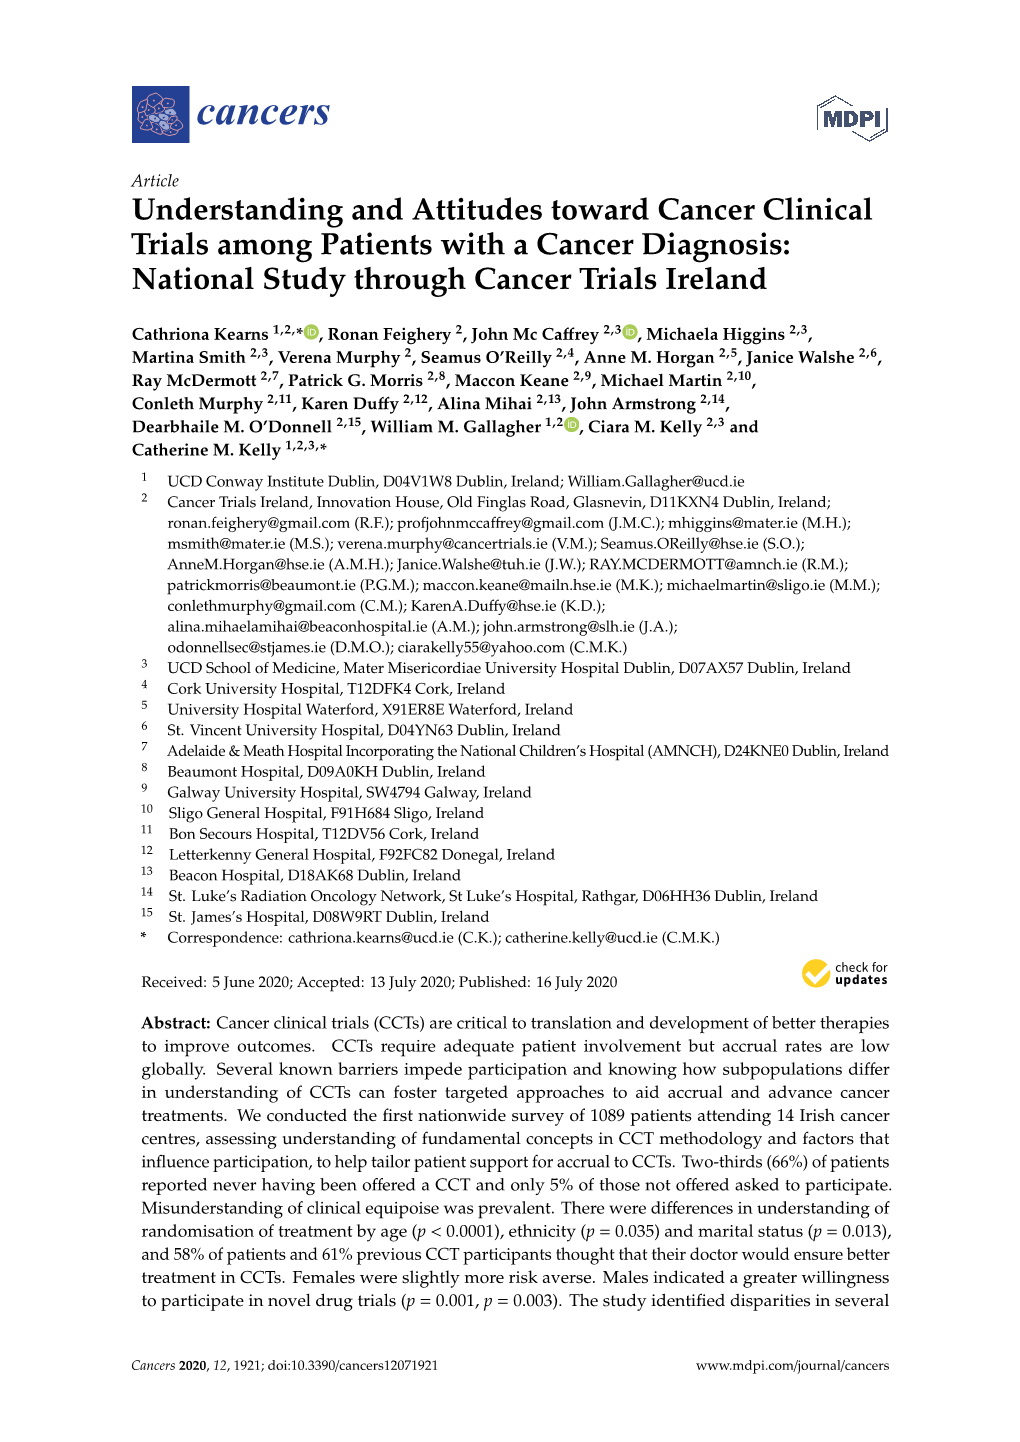 Understanding and Attitudes Toward Cancer Clinical Trials Among Patients with a Cancer Diagnosis: National Study Through Cancer Trials Ireland